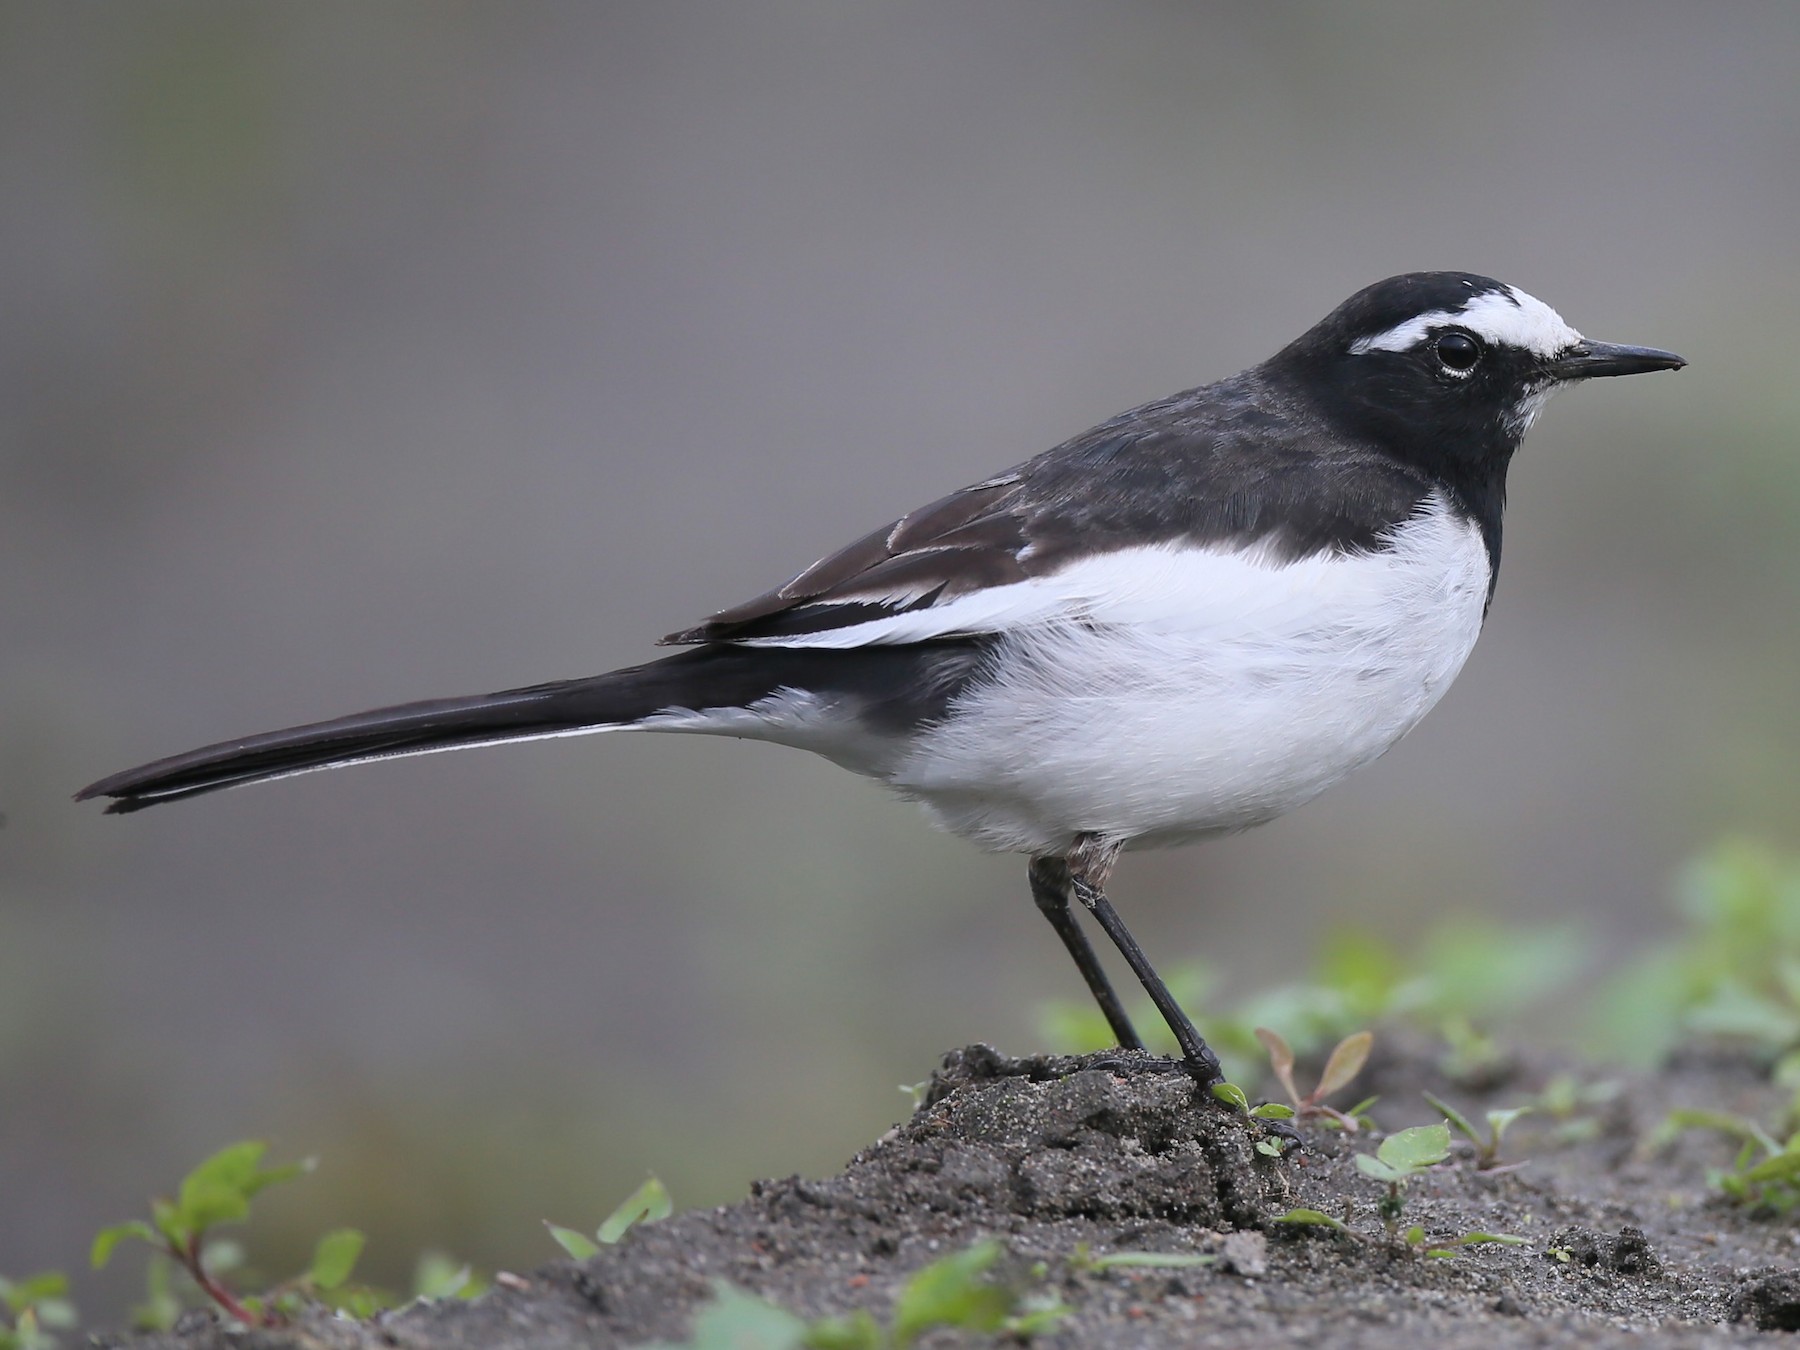 Japanese Wagtail - Ting-Wei (廷維) HUNG (洪)